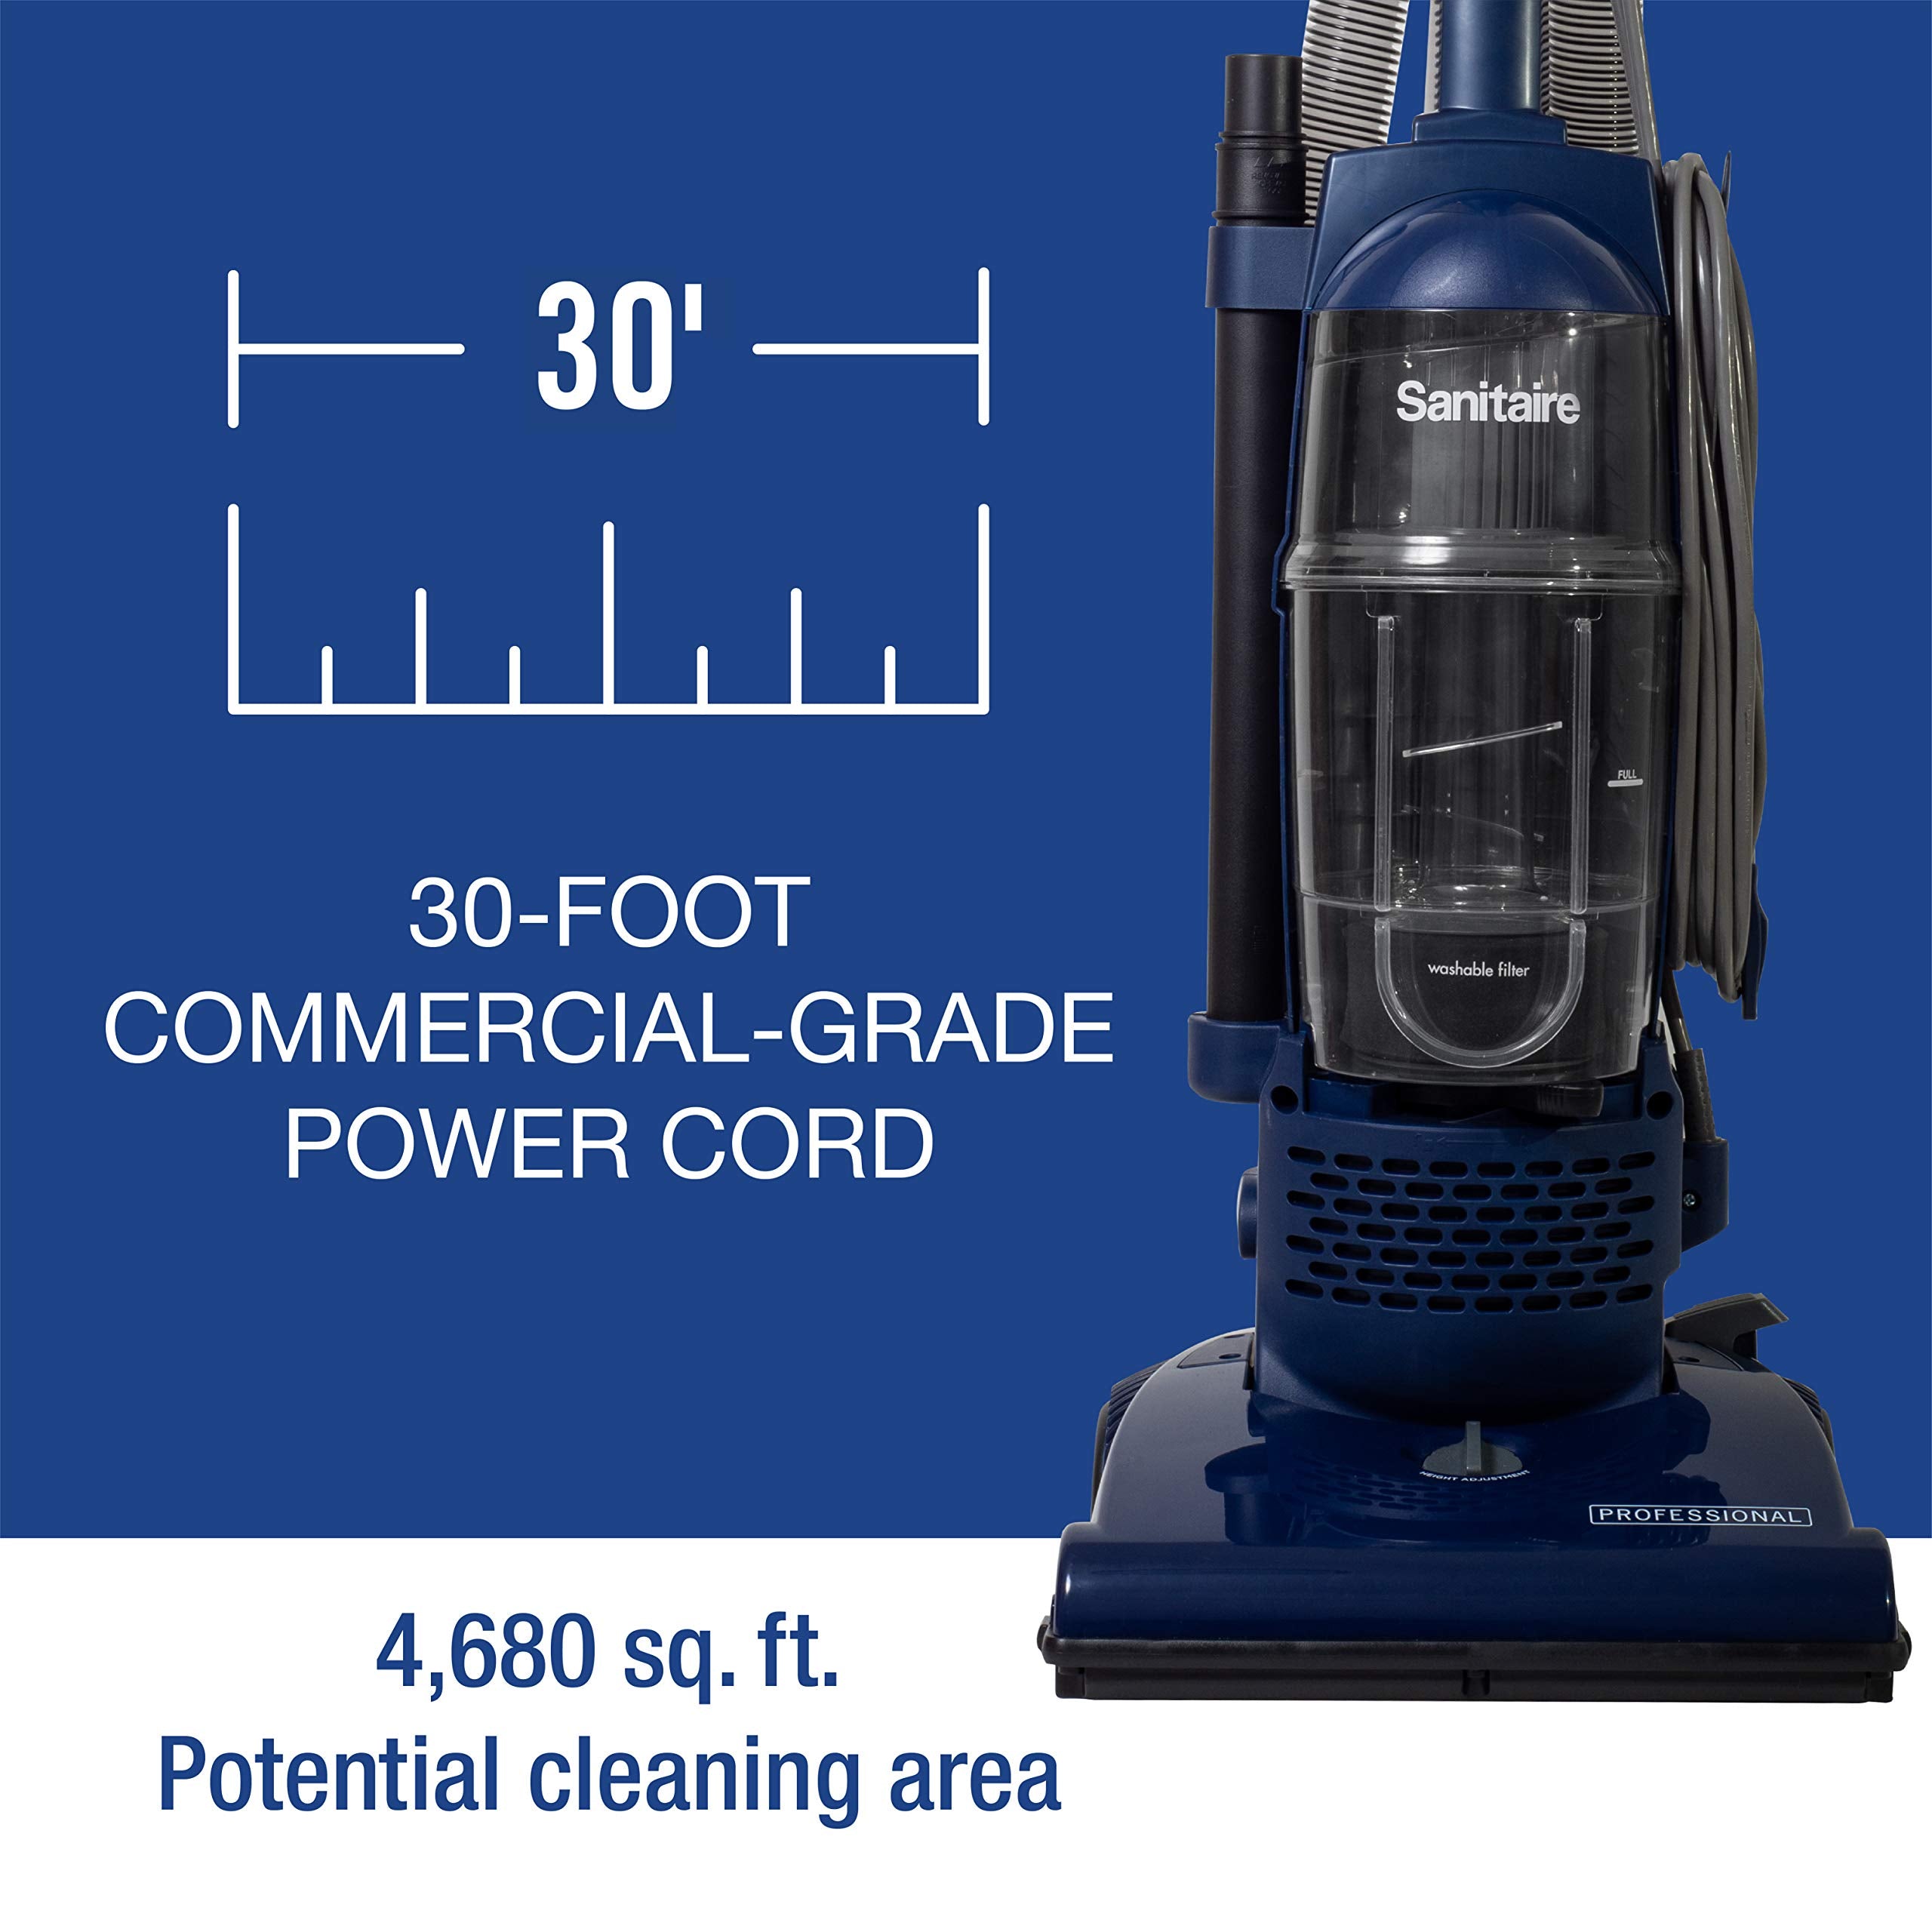 Sanitaire Professional Bagless Upright Commercial Vacuum with Tools, SL4410A